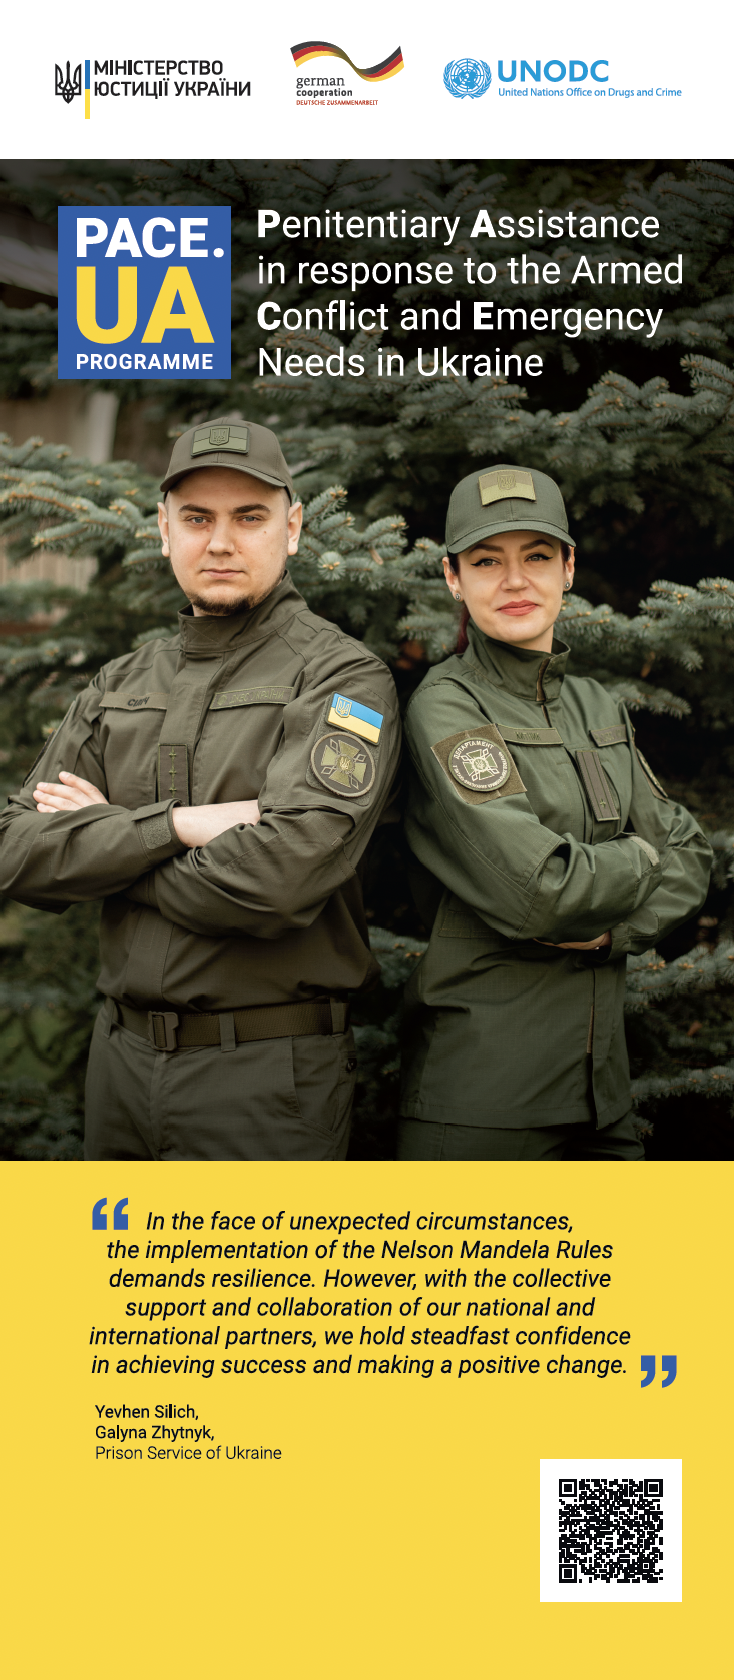 In the face of unexpected circumstances, the implementation of the Nelson Mandela Rules demands resilience. However, with the collective support and collaboration of our national and international partners, we hold steadfast confidence in achieving success and making a positive change." Yevhen Silic and Galyna Zhytnyk (Prison Service of Ukraine)